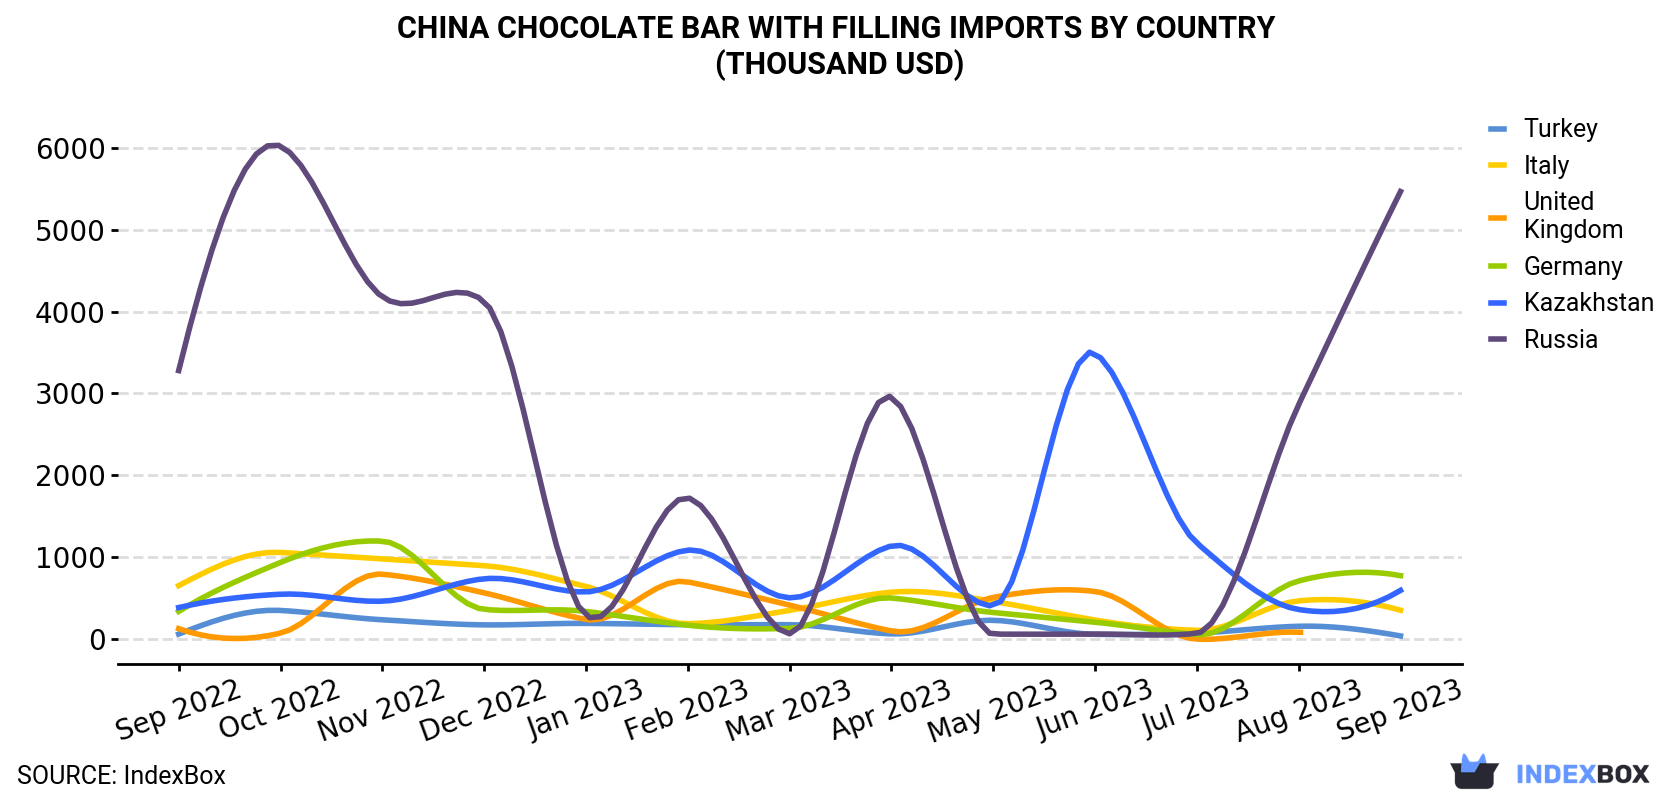 China Chocolate Bar With Filling Imports By Country (Thousand USD)